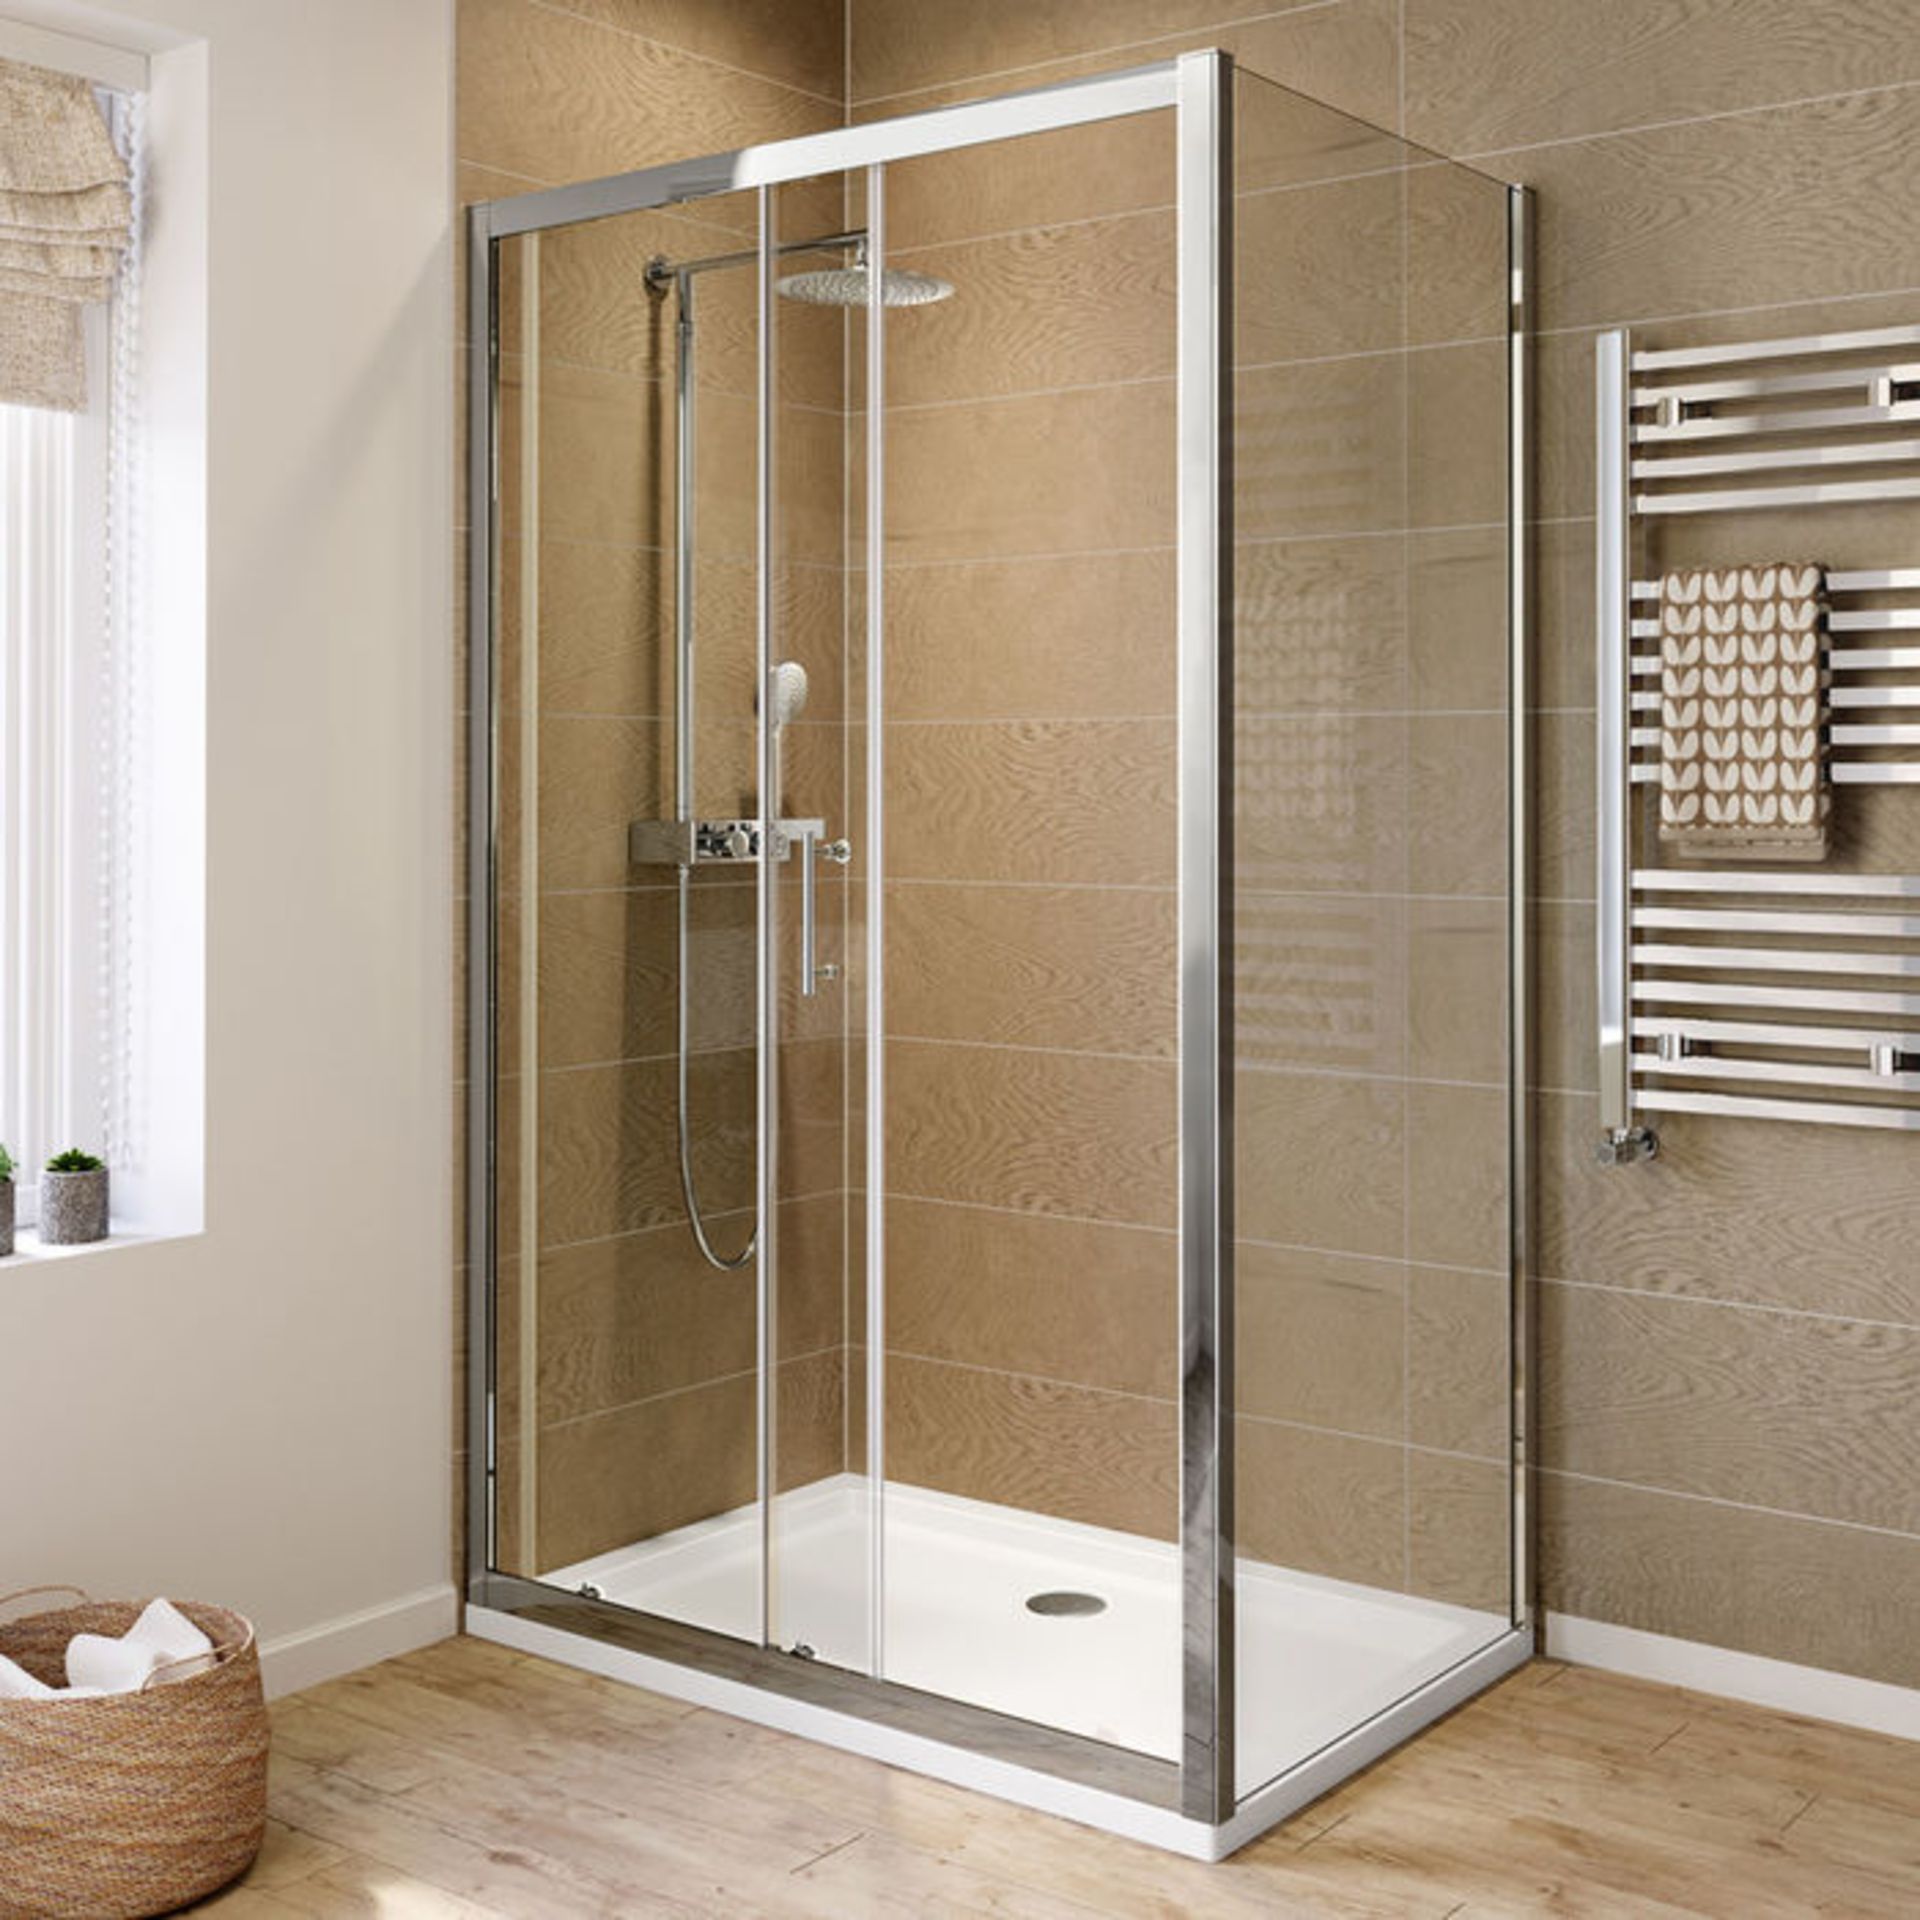 New Twyford's 1700mm - 6mm - Sliding Door Shower Enclosure. RRP £763.99.6mm Safety Glass Full... - Image 2 of 2